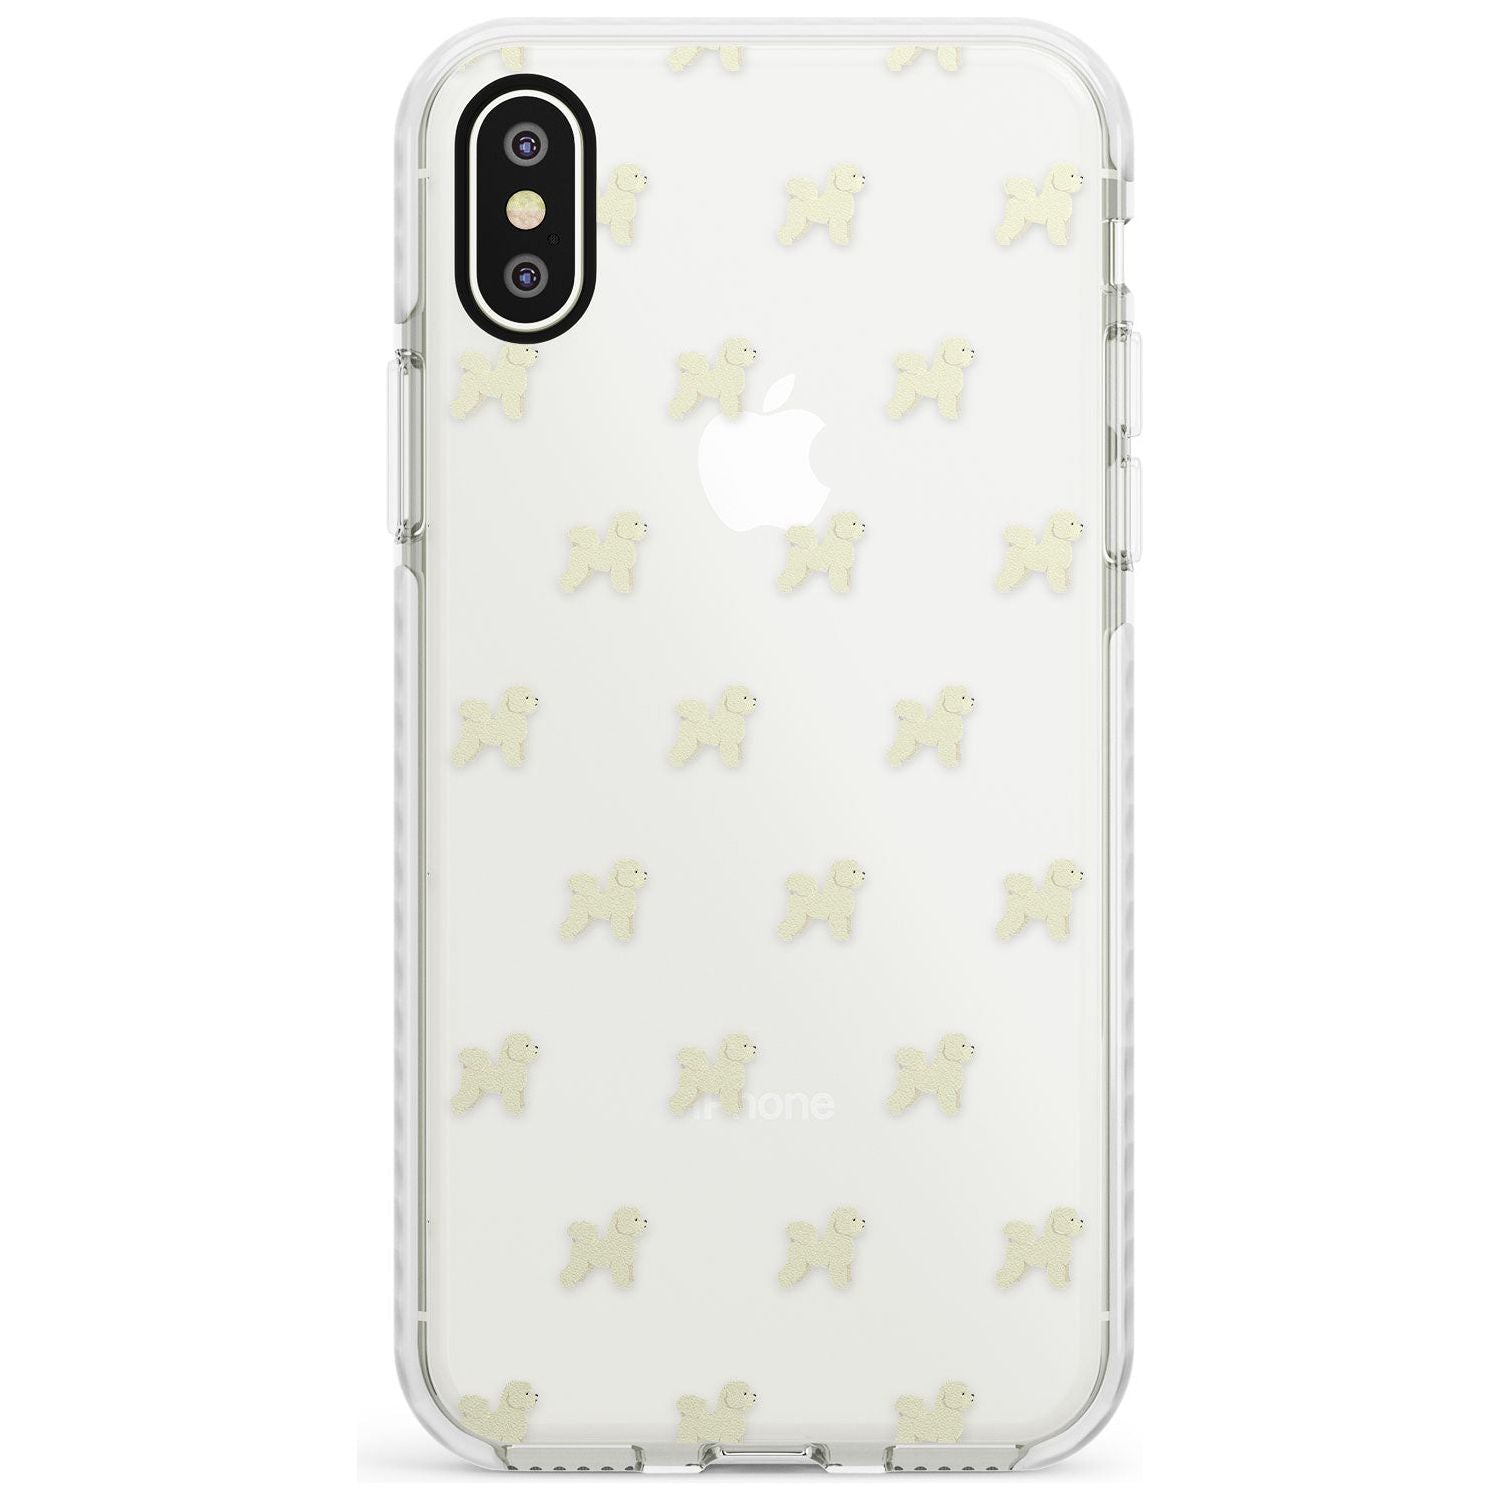 Bichon Frise Dog Pattern Clear Impact Phone Case for iPhone X XS Max XR